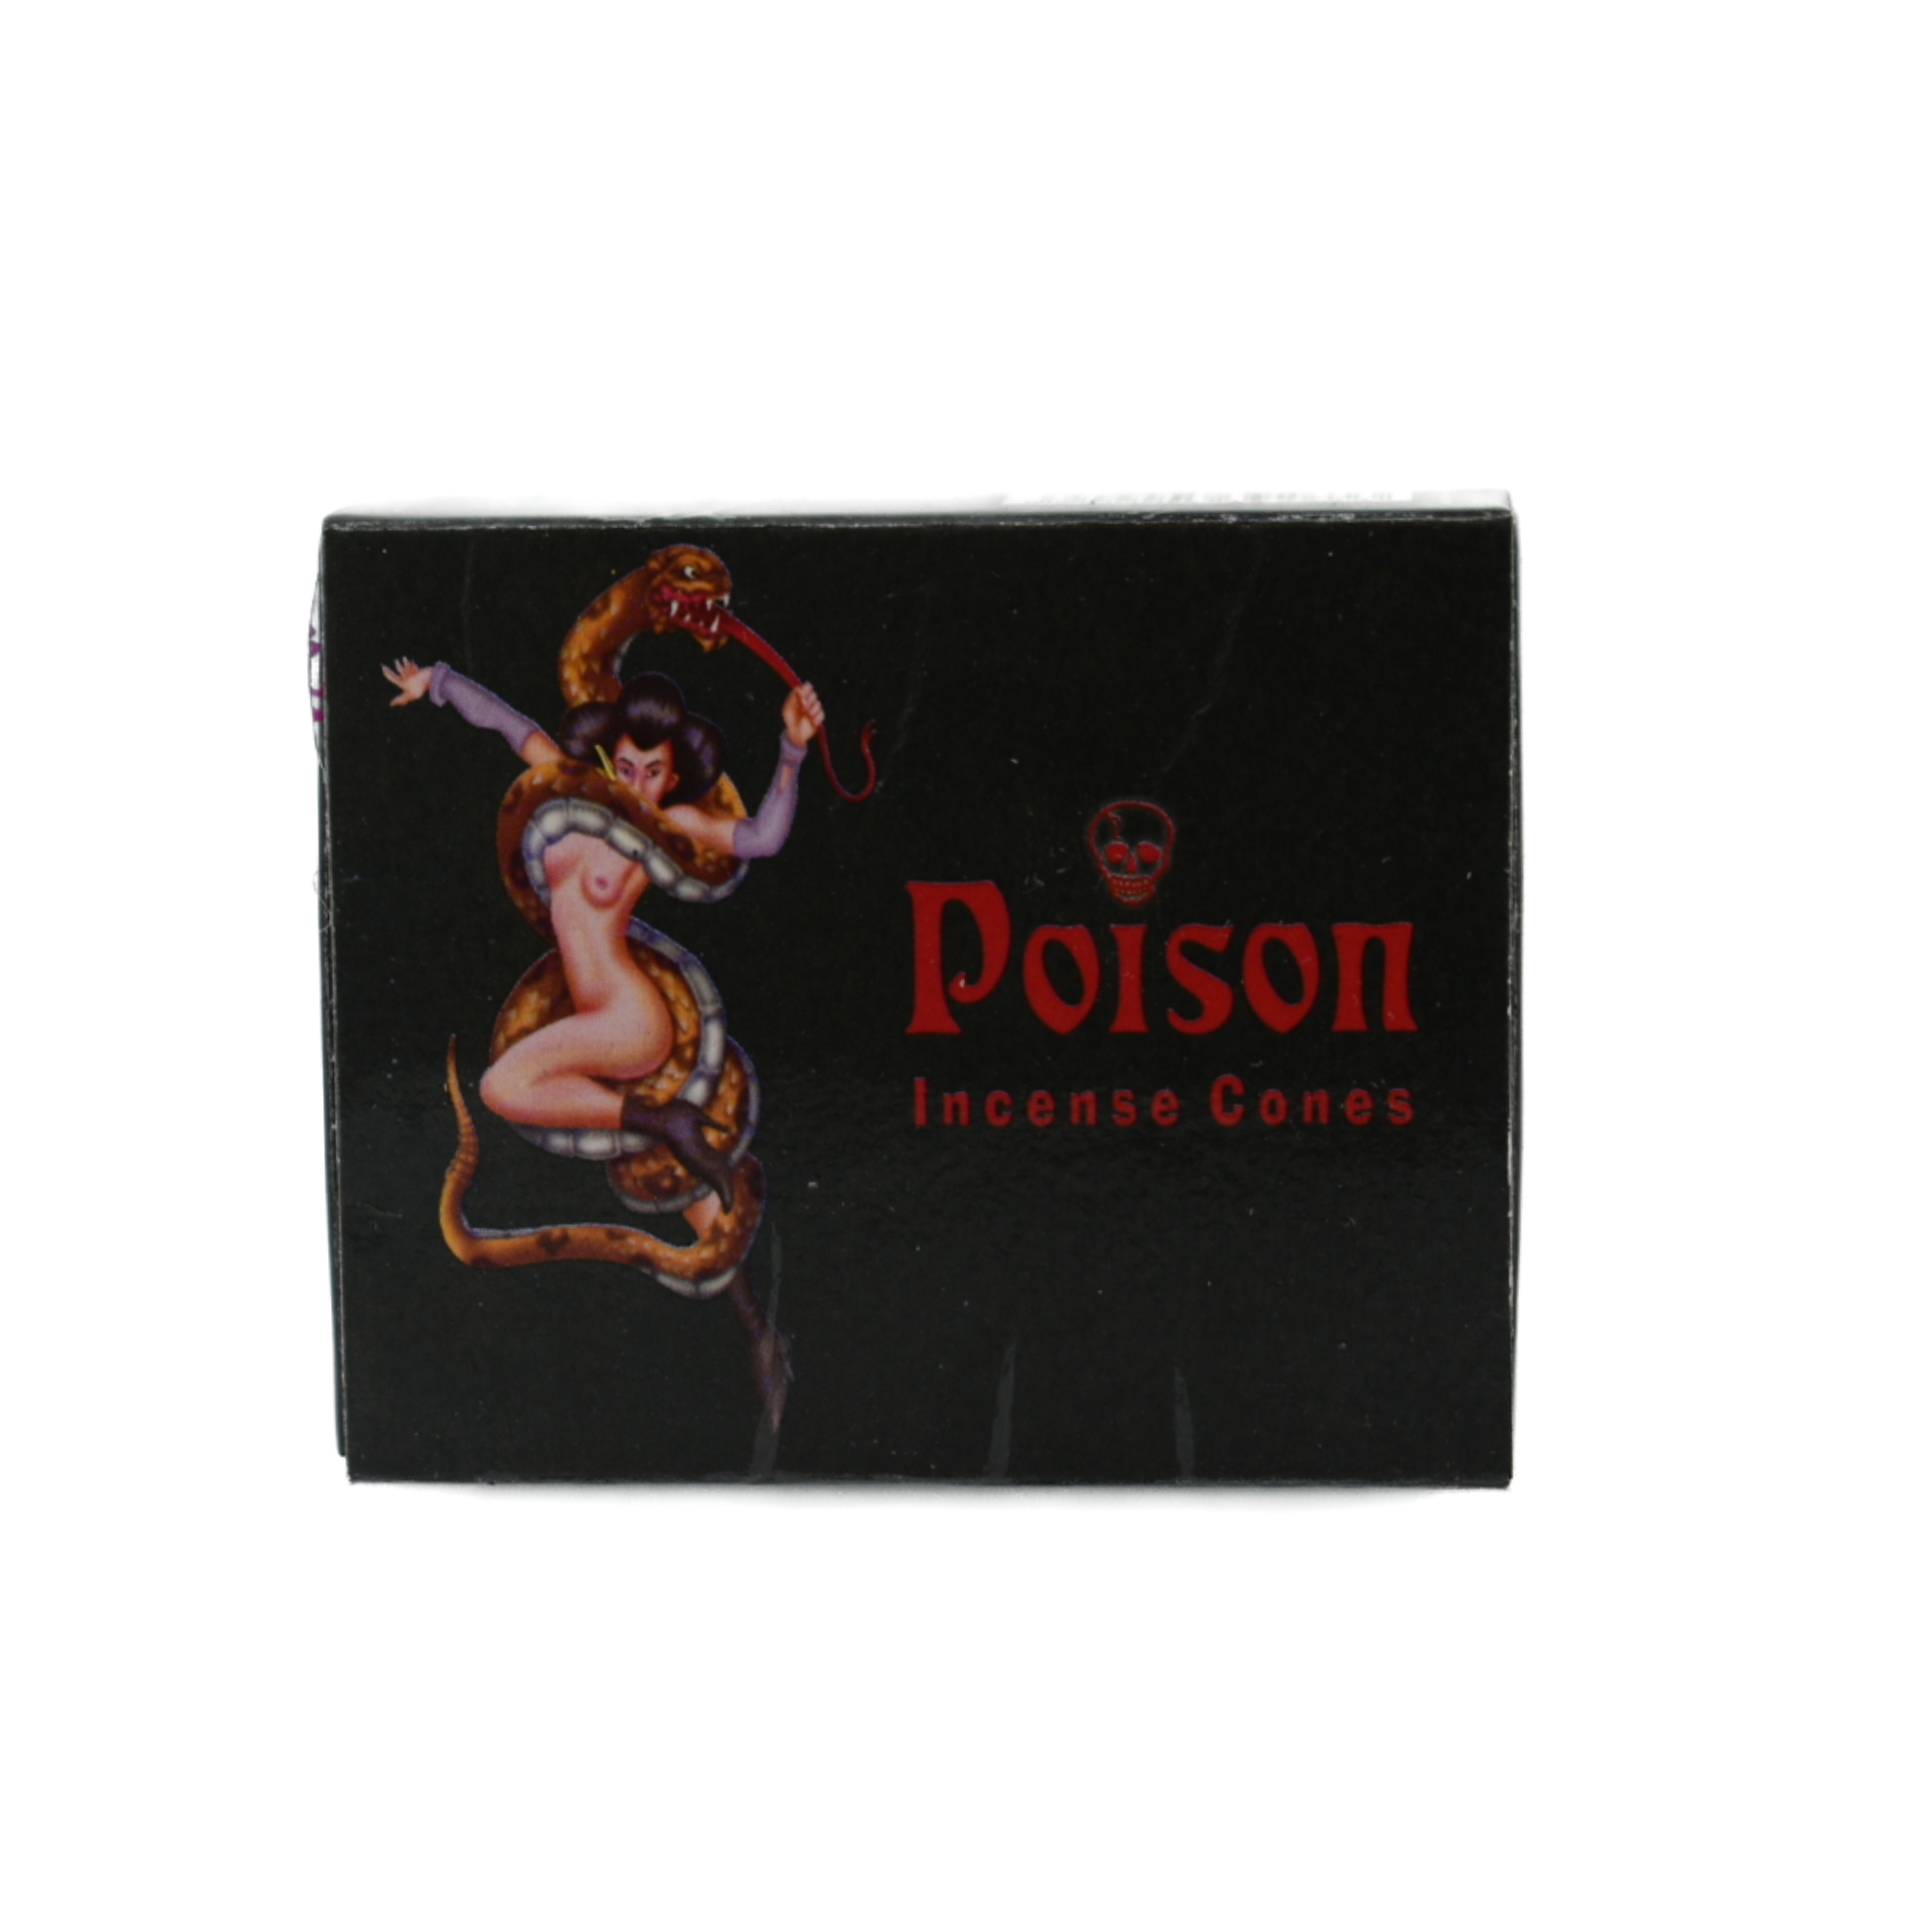 Poison Incense Cones.  Box is black with a red title stating Poison Incense Cones.  Left side of the cover has a female with an angry snake wrapped around her.